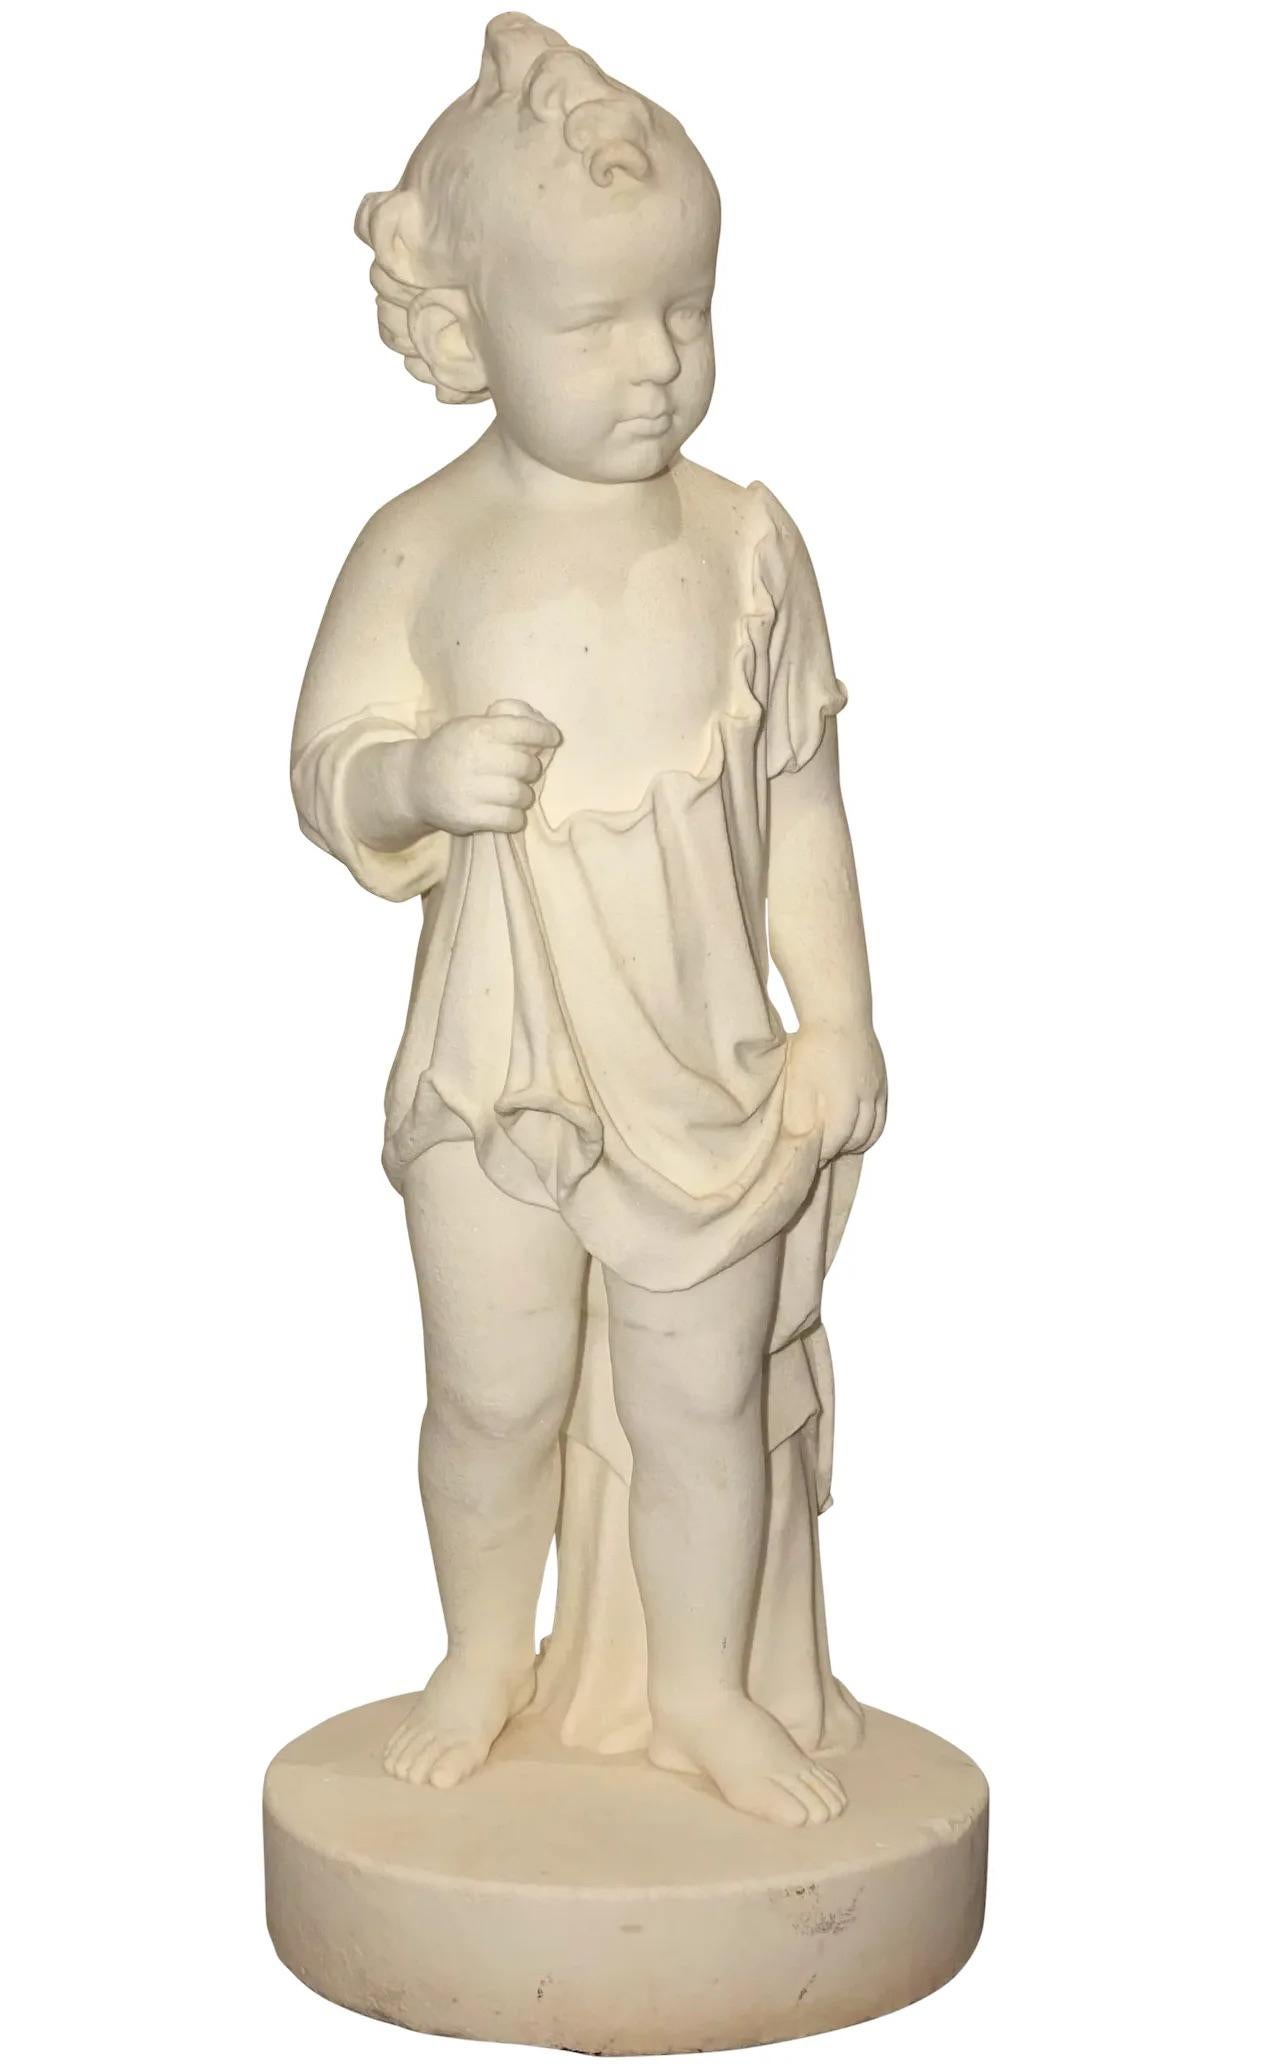 Sculpture of a Young Boy with Robe